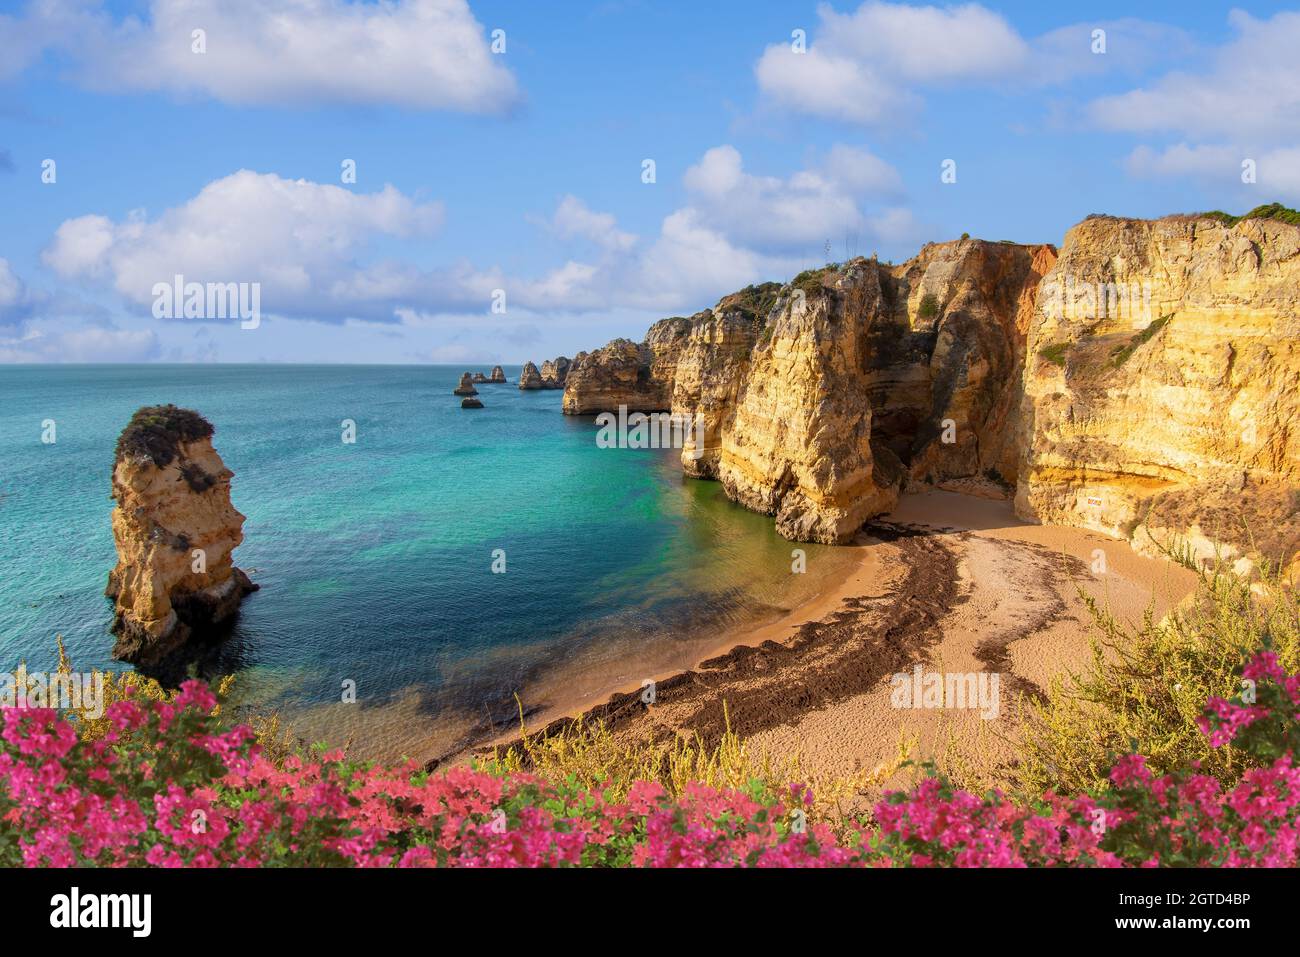 A view of the Algarve Coast, Portugal Stock Photo